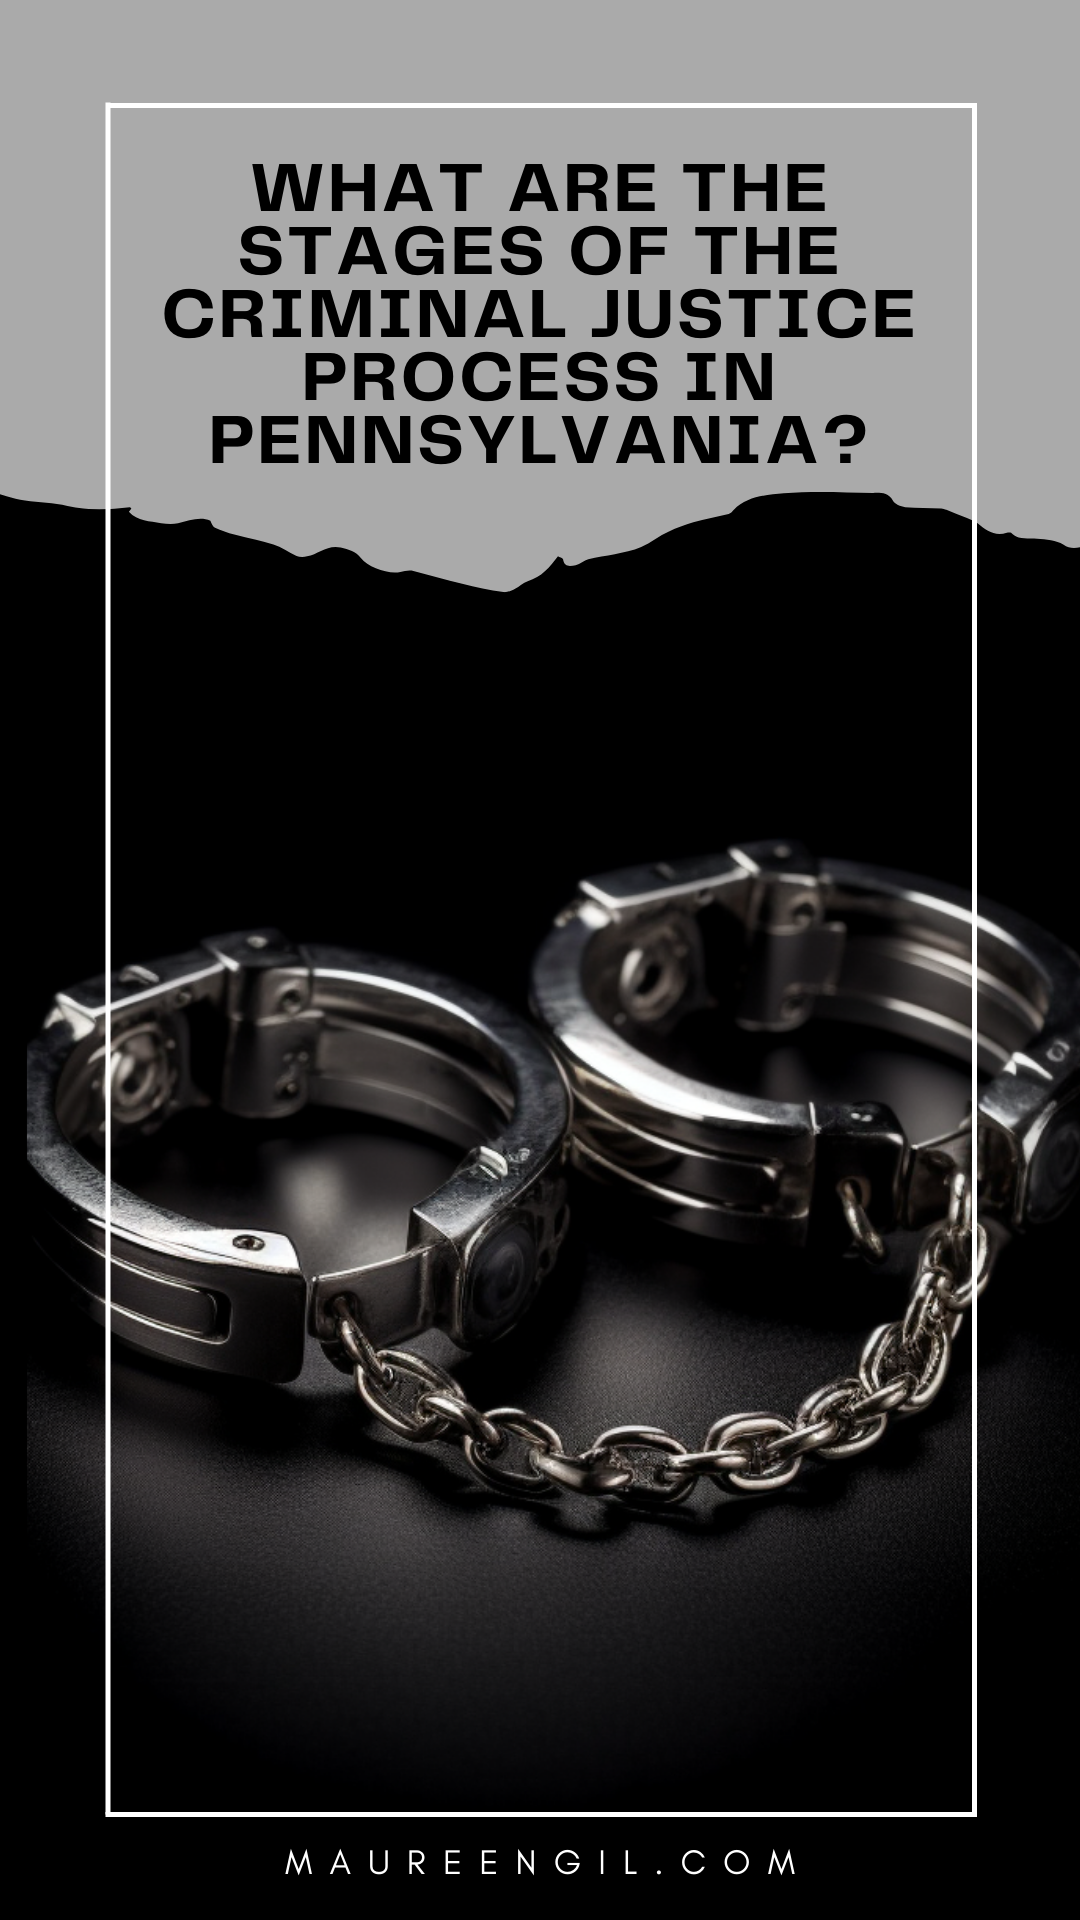 From arrest to sentencing, the criminal justice process in Pennsylvania can be complex. This article outlines the stages you can expect to go through.